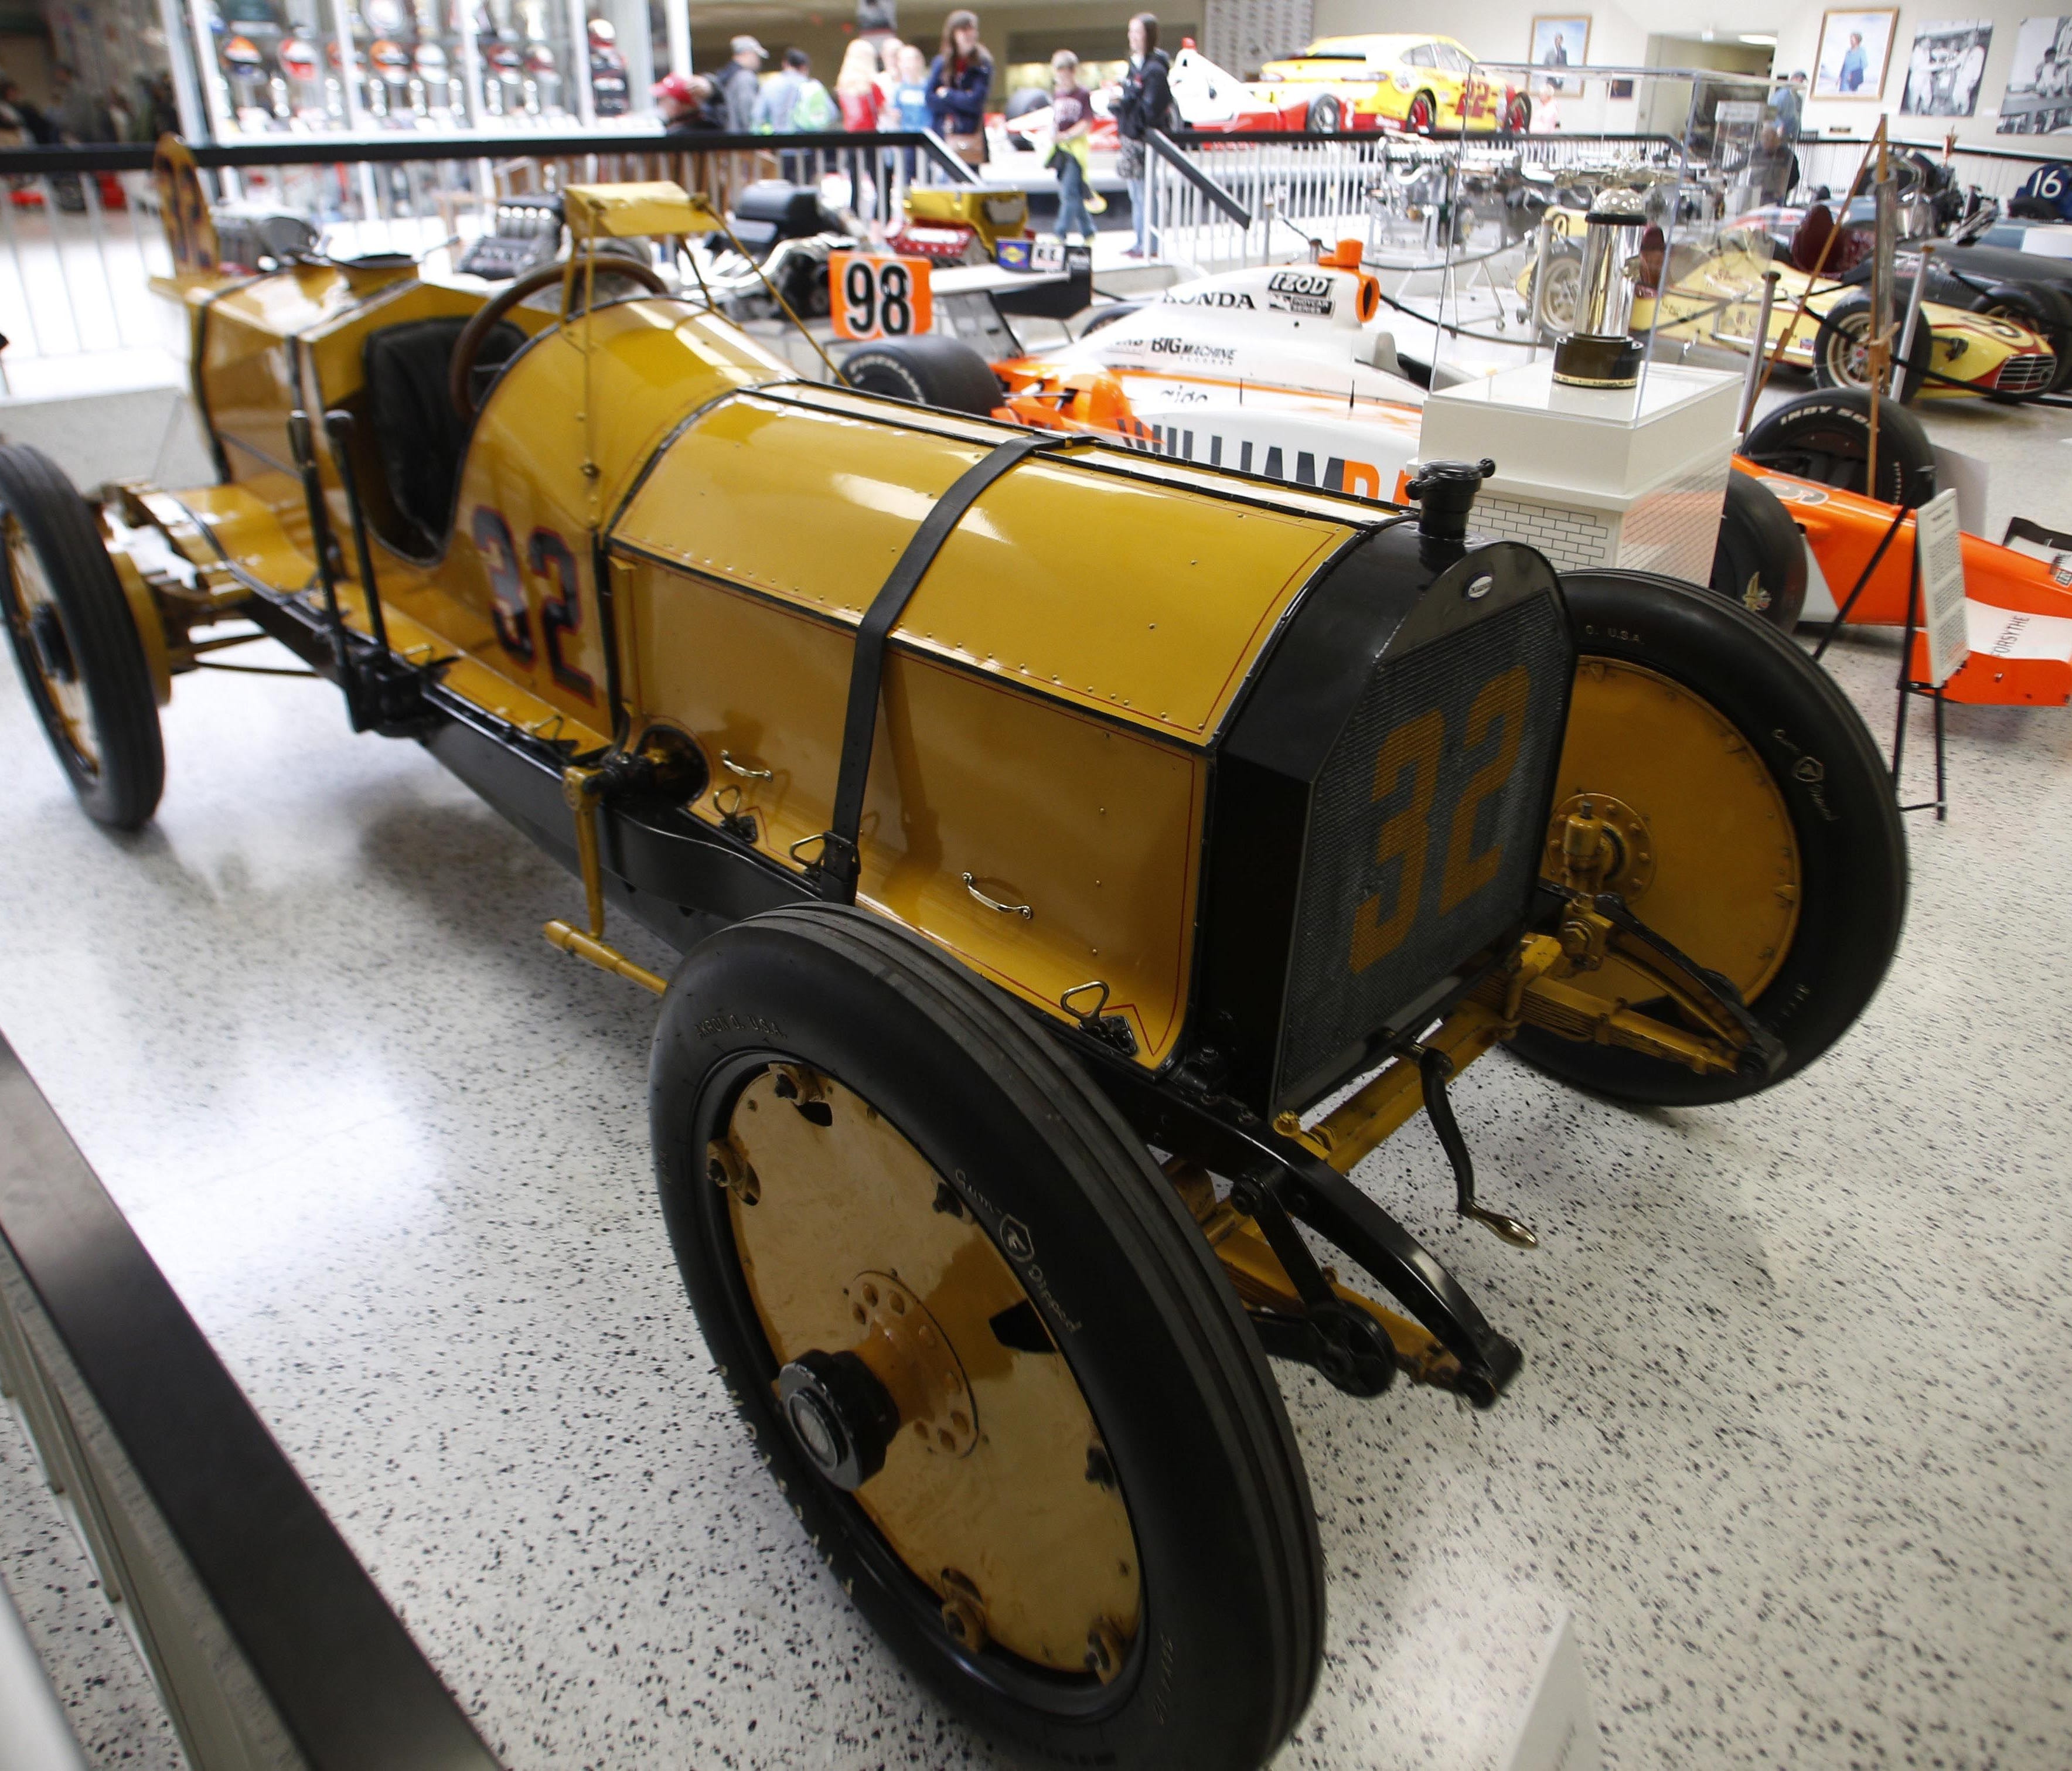 To help you break free from the boring-gift rut, consider taking dad to the The Indianapolis Motor Speedway museum. The Marmon Wasp car of 1911 Indianapolis 500 winner Ray Harroun is on display at the Indianapolis Motor Speedway Hall of Fame Museum d